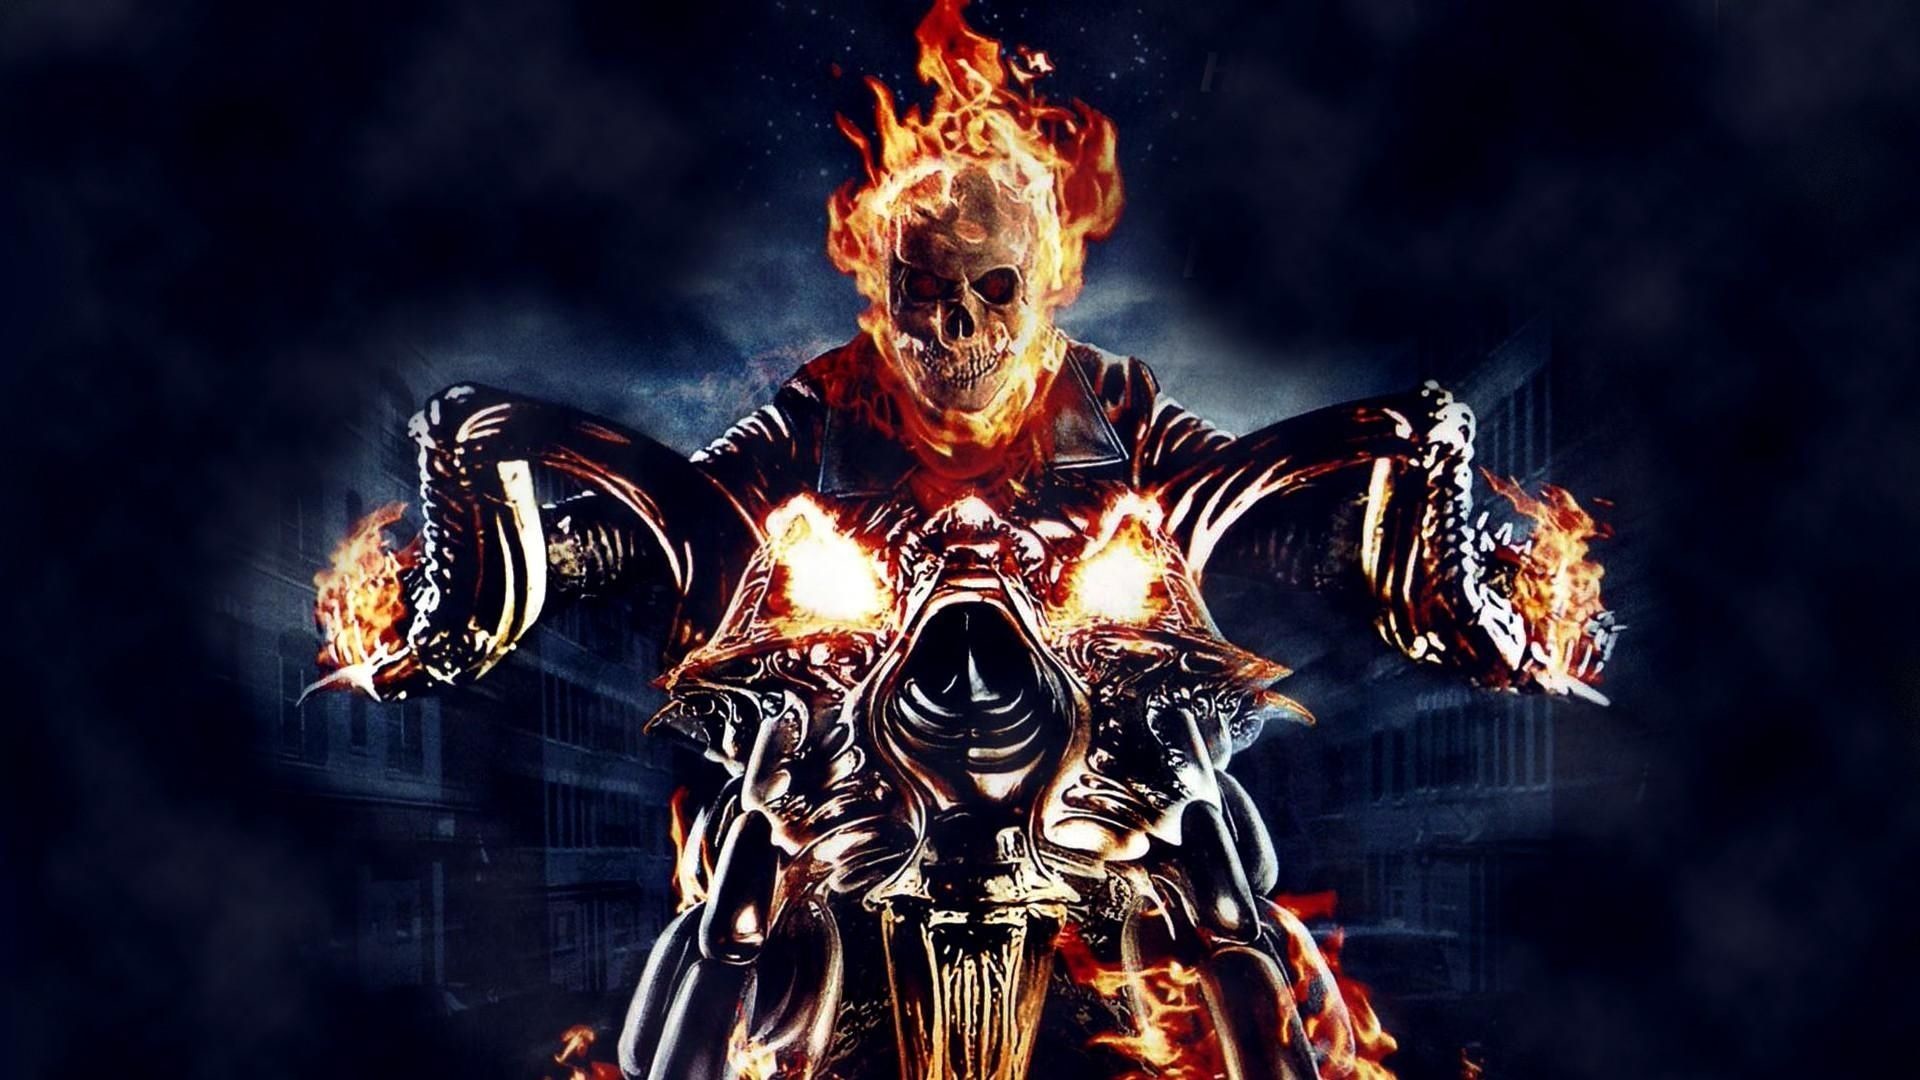 1920x1080 Download Wallpaper  Ghost rider, Motorcycle, Fire, Skull .